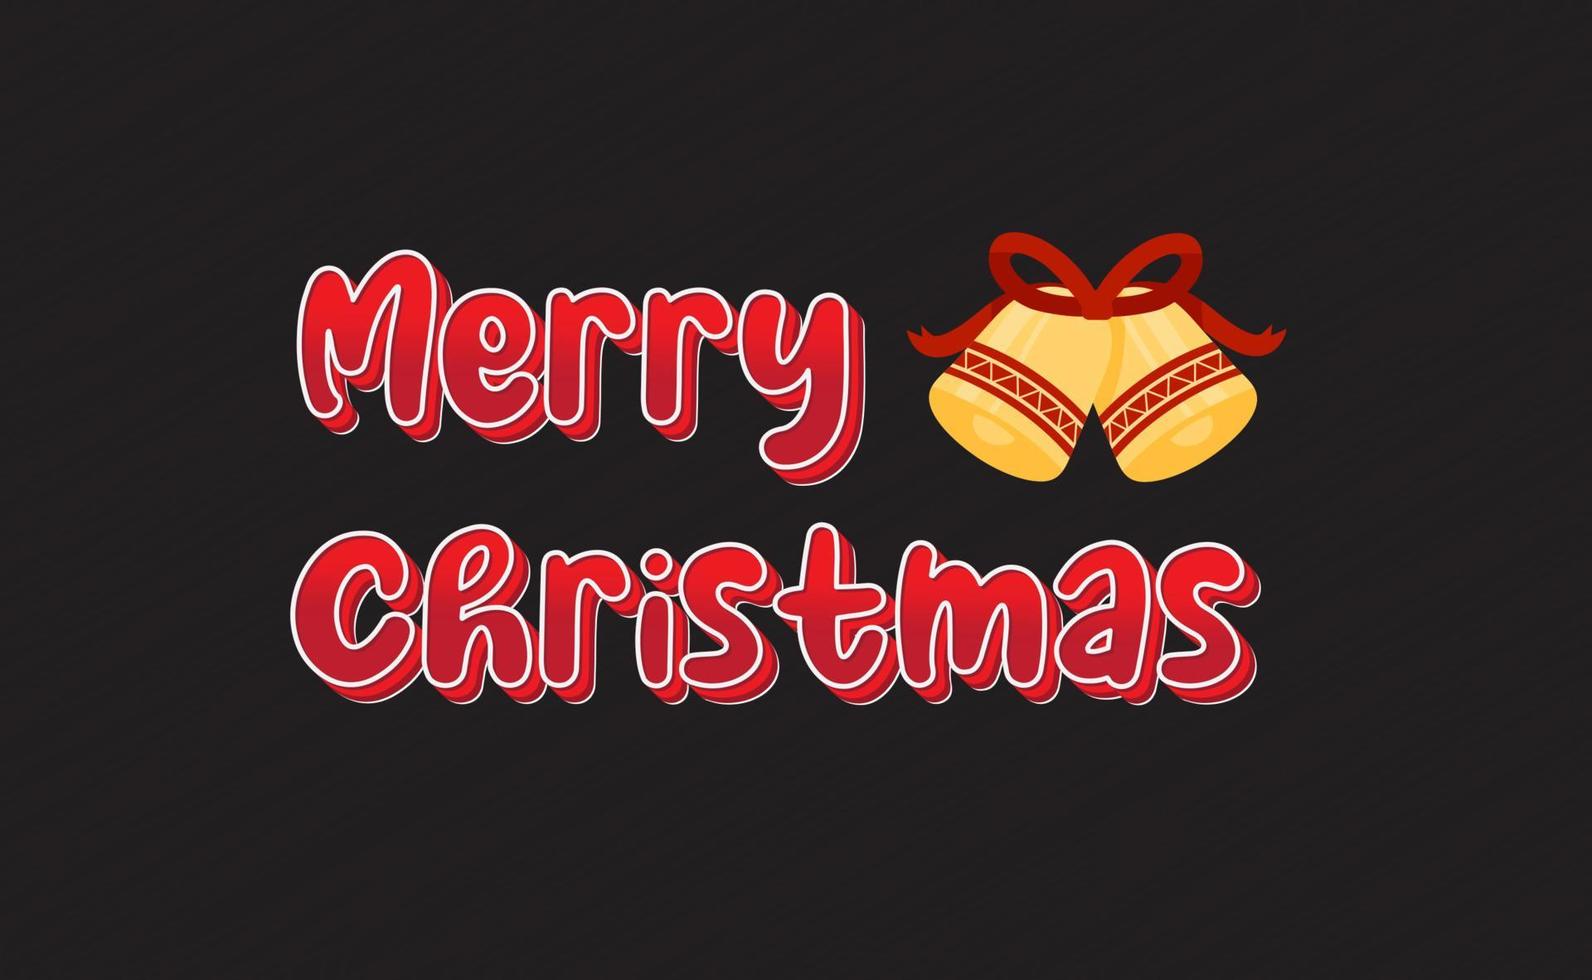 Merry Christmas Words Vector Illustration with Bell Ornament